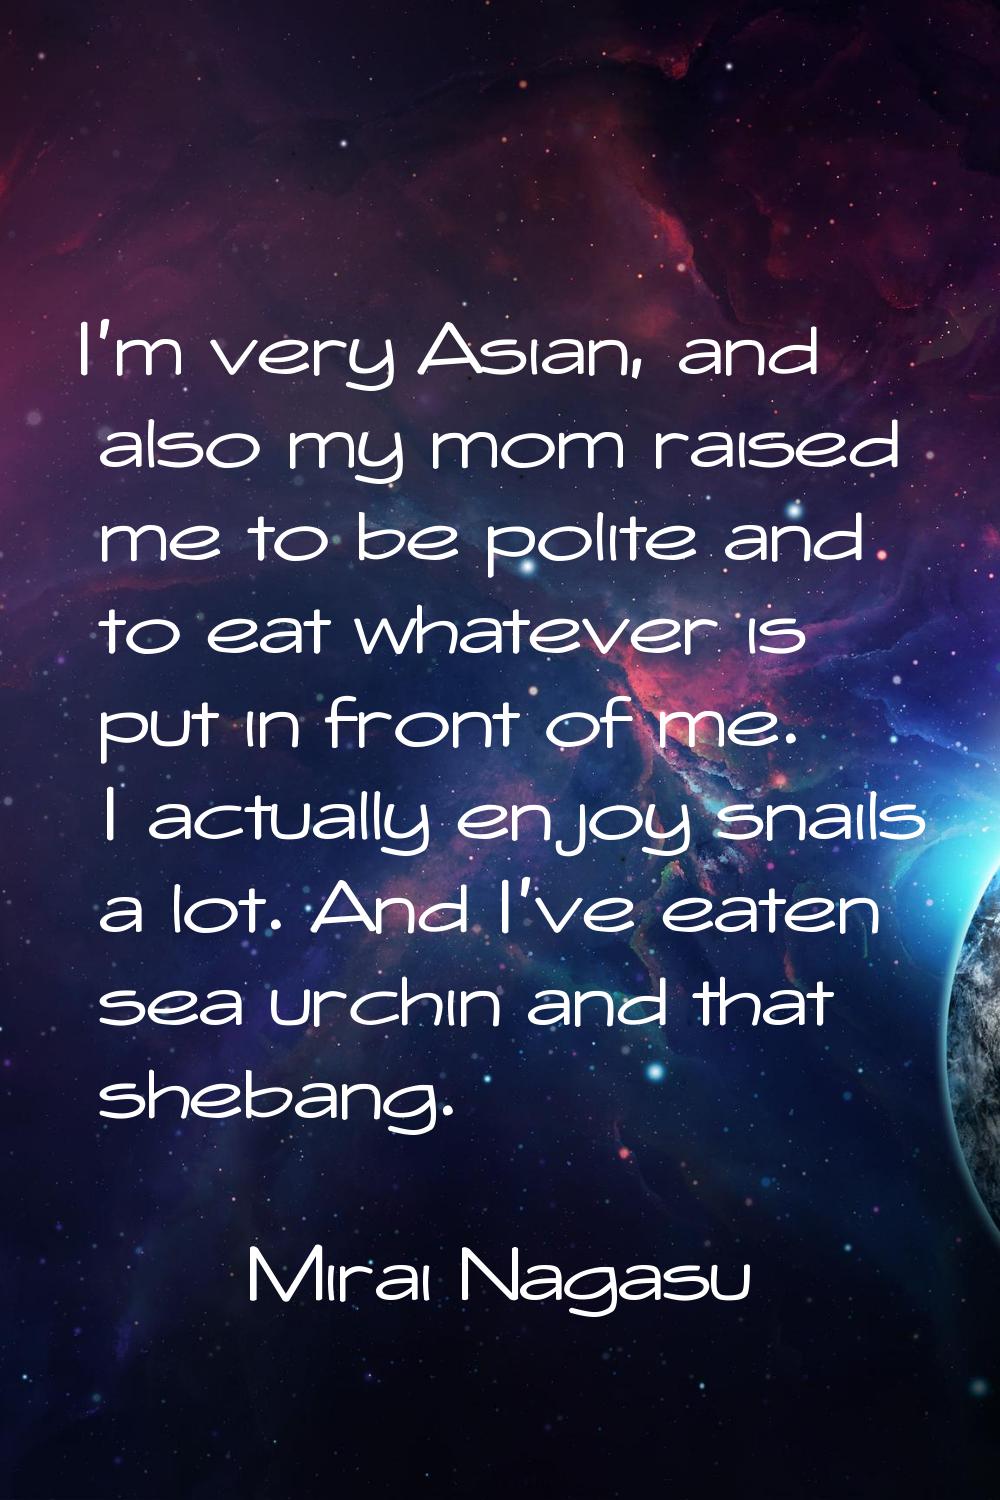 I'm very Asian, and also my mom raised me to be polite and to eat whatever is put in front of me. I